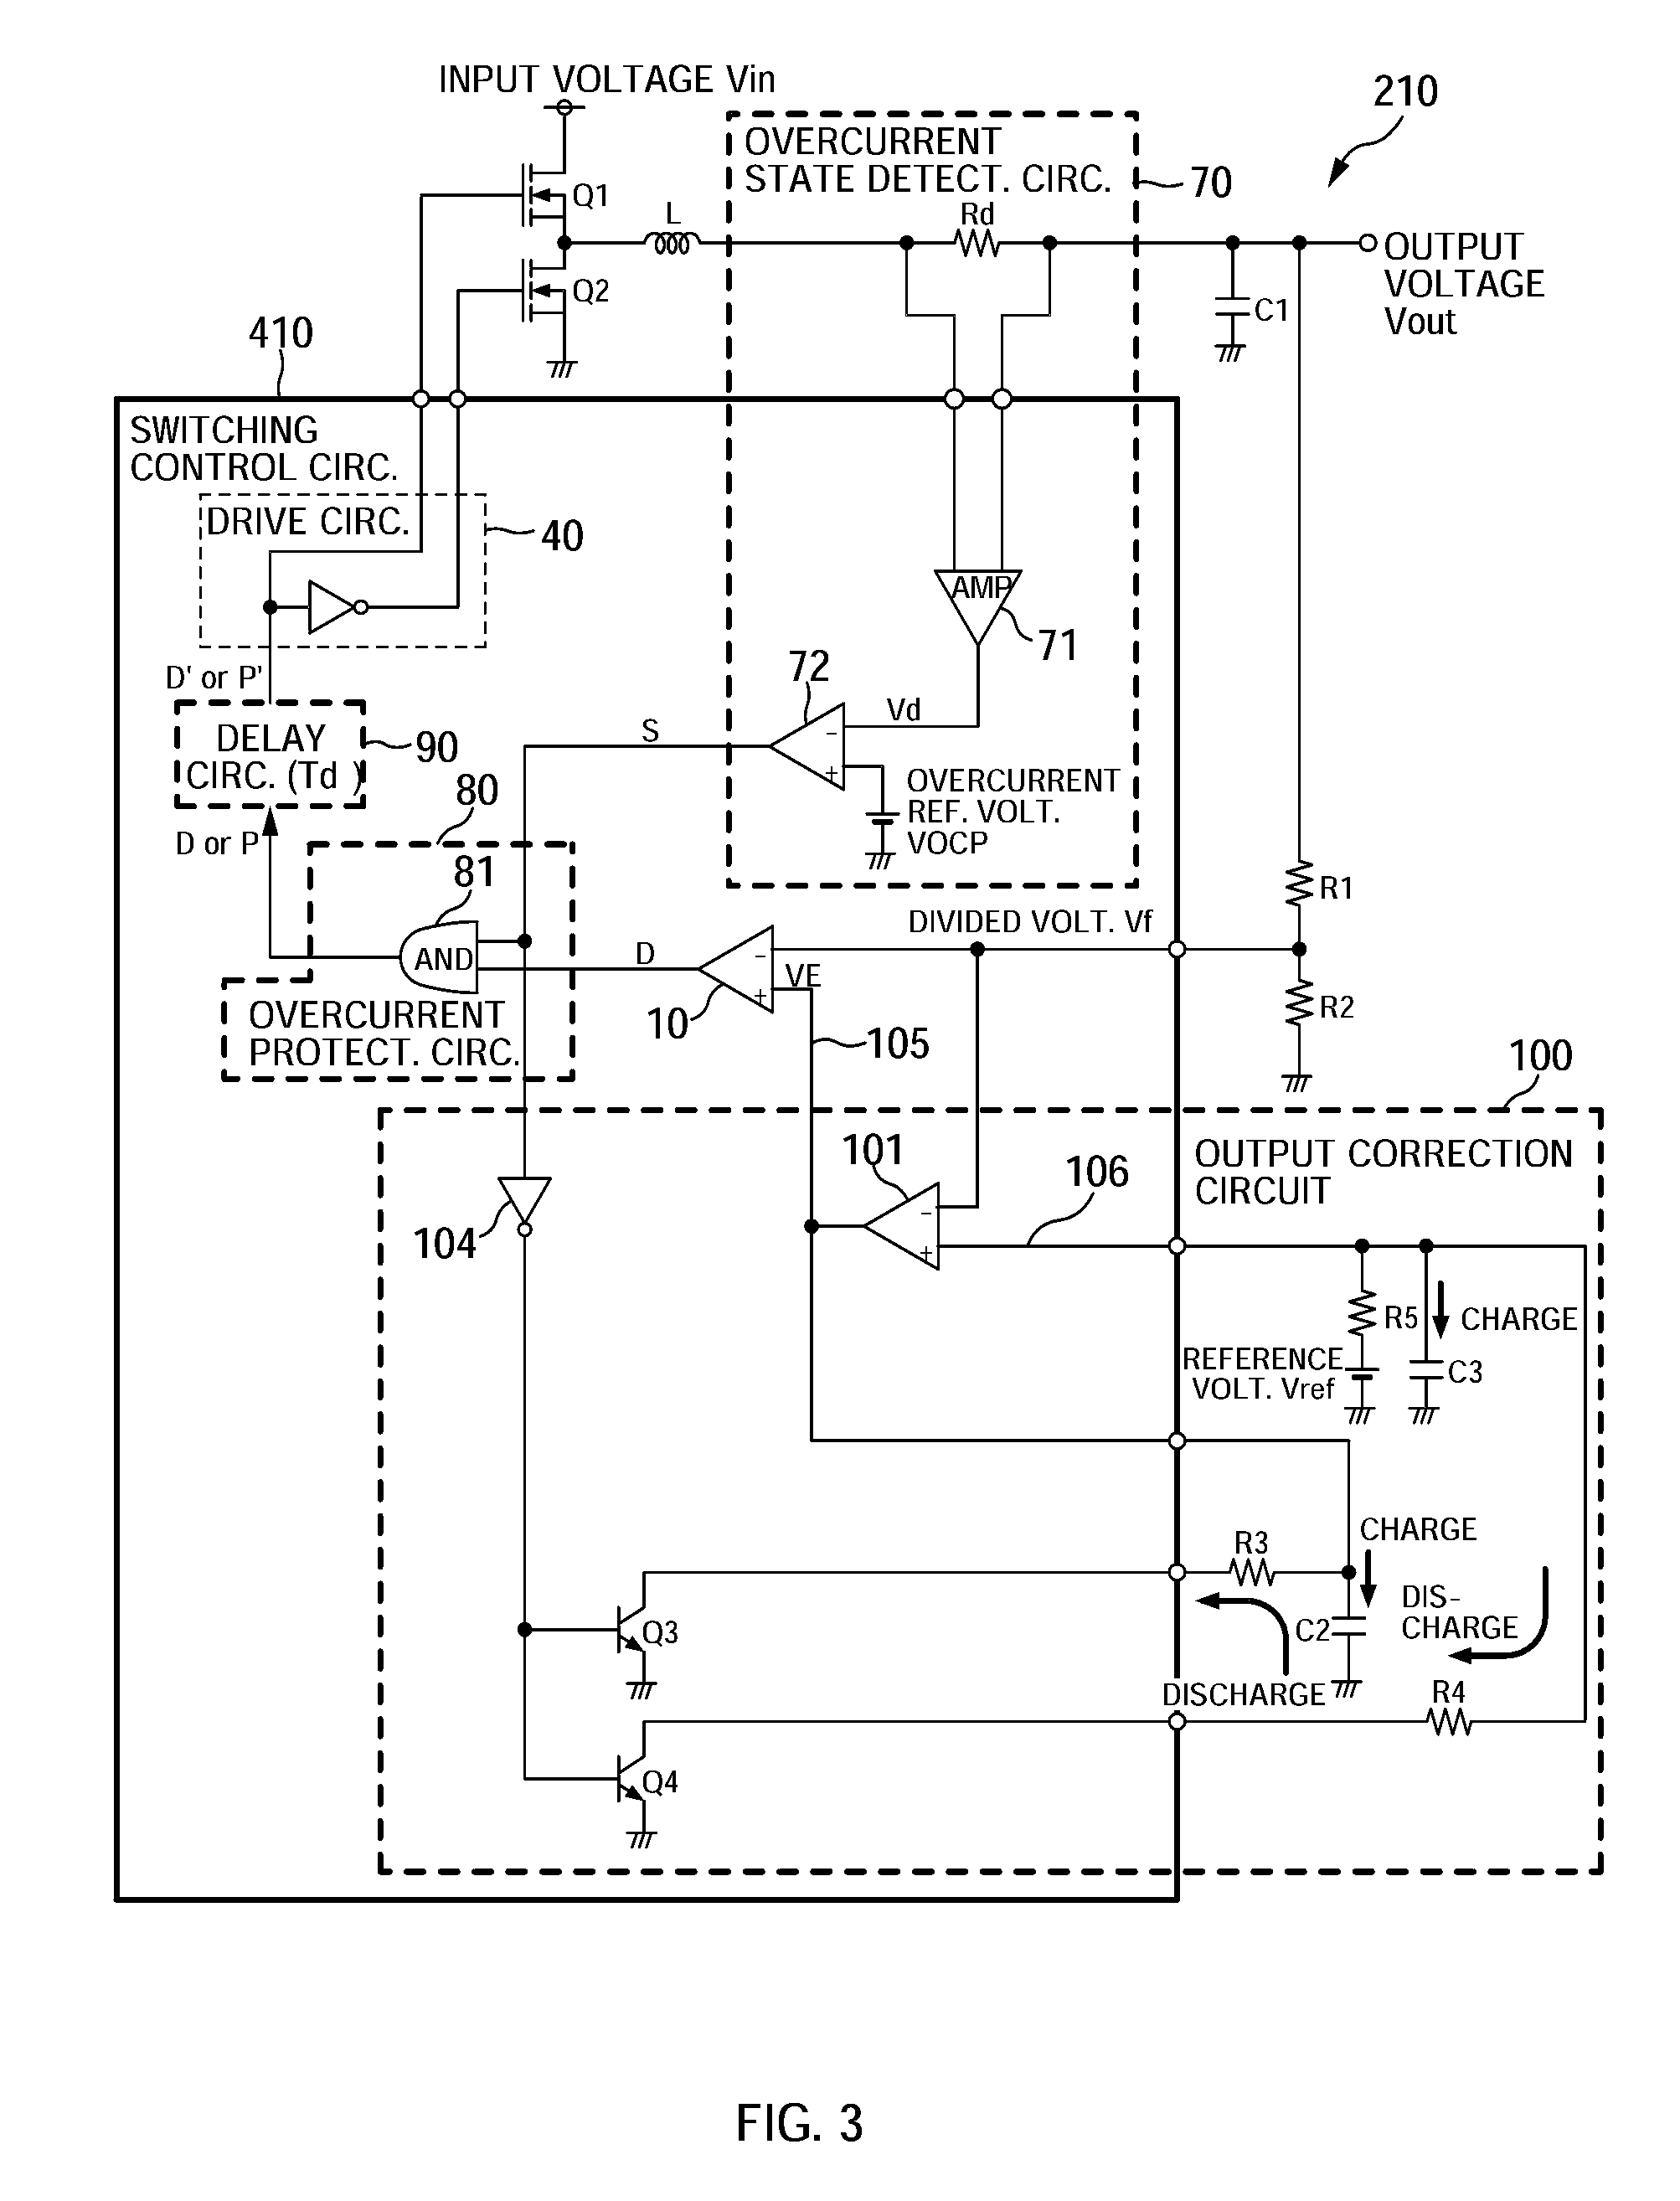 Switching Control Circuit and Self-Excited DC-DC Converter